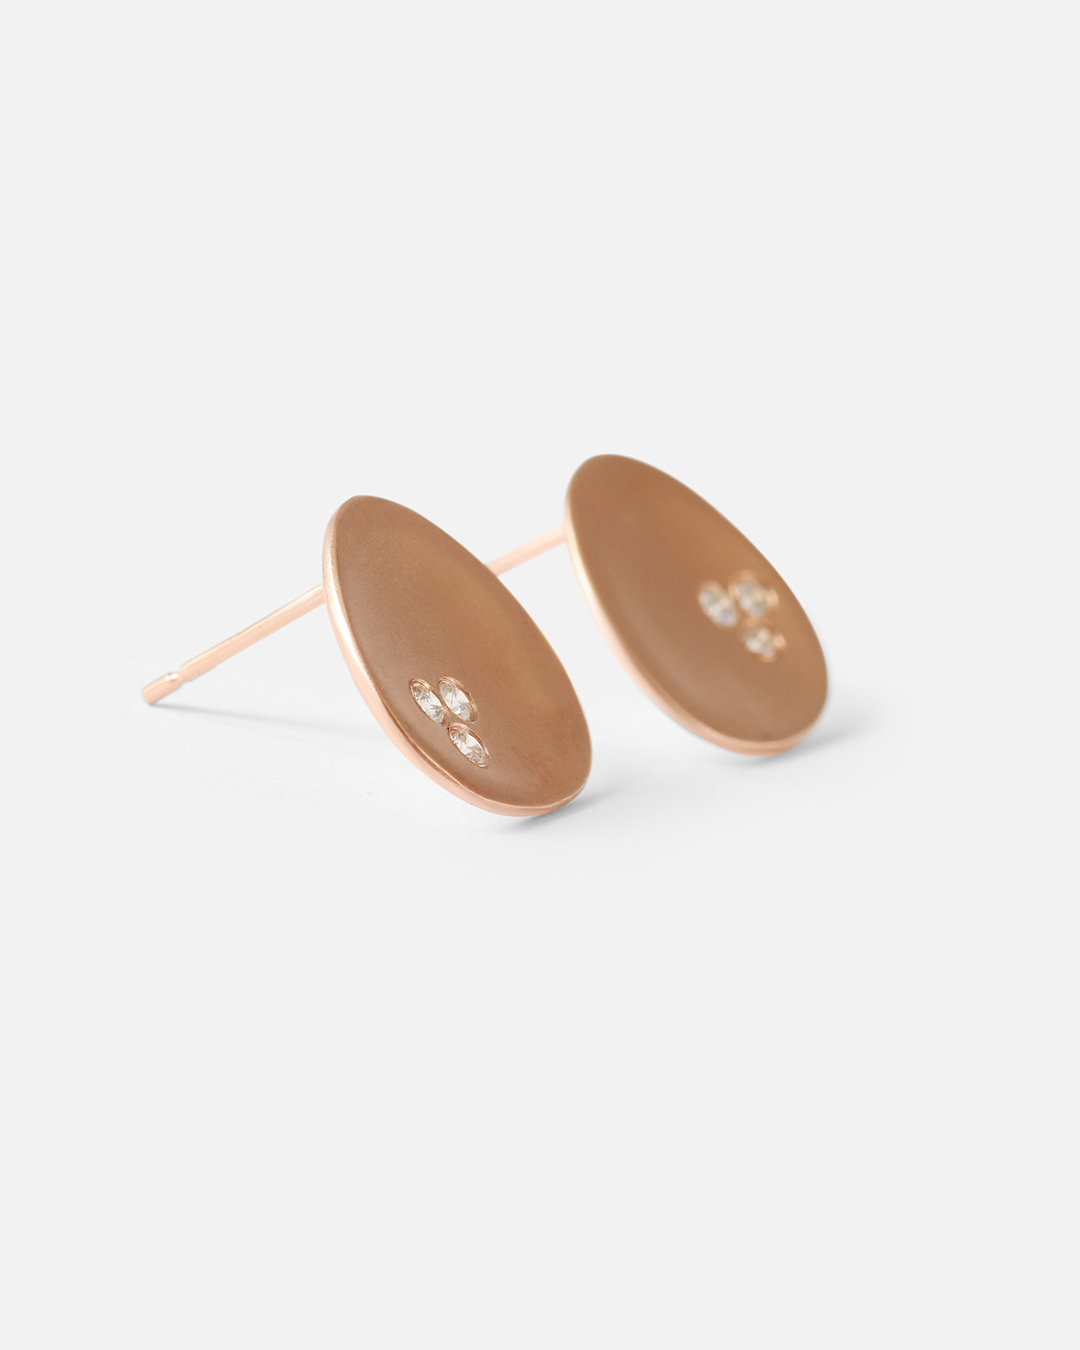 Leaf / Mini Rose Gold + Diamond Studs By Hiroyo in earrings Category